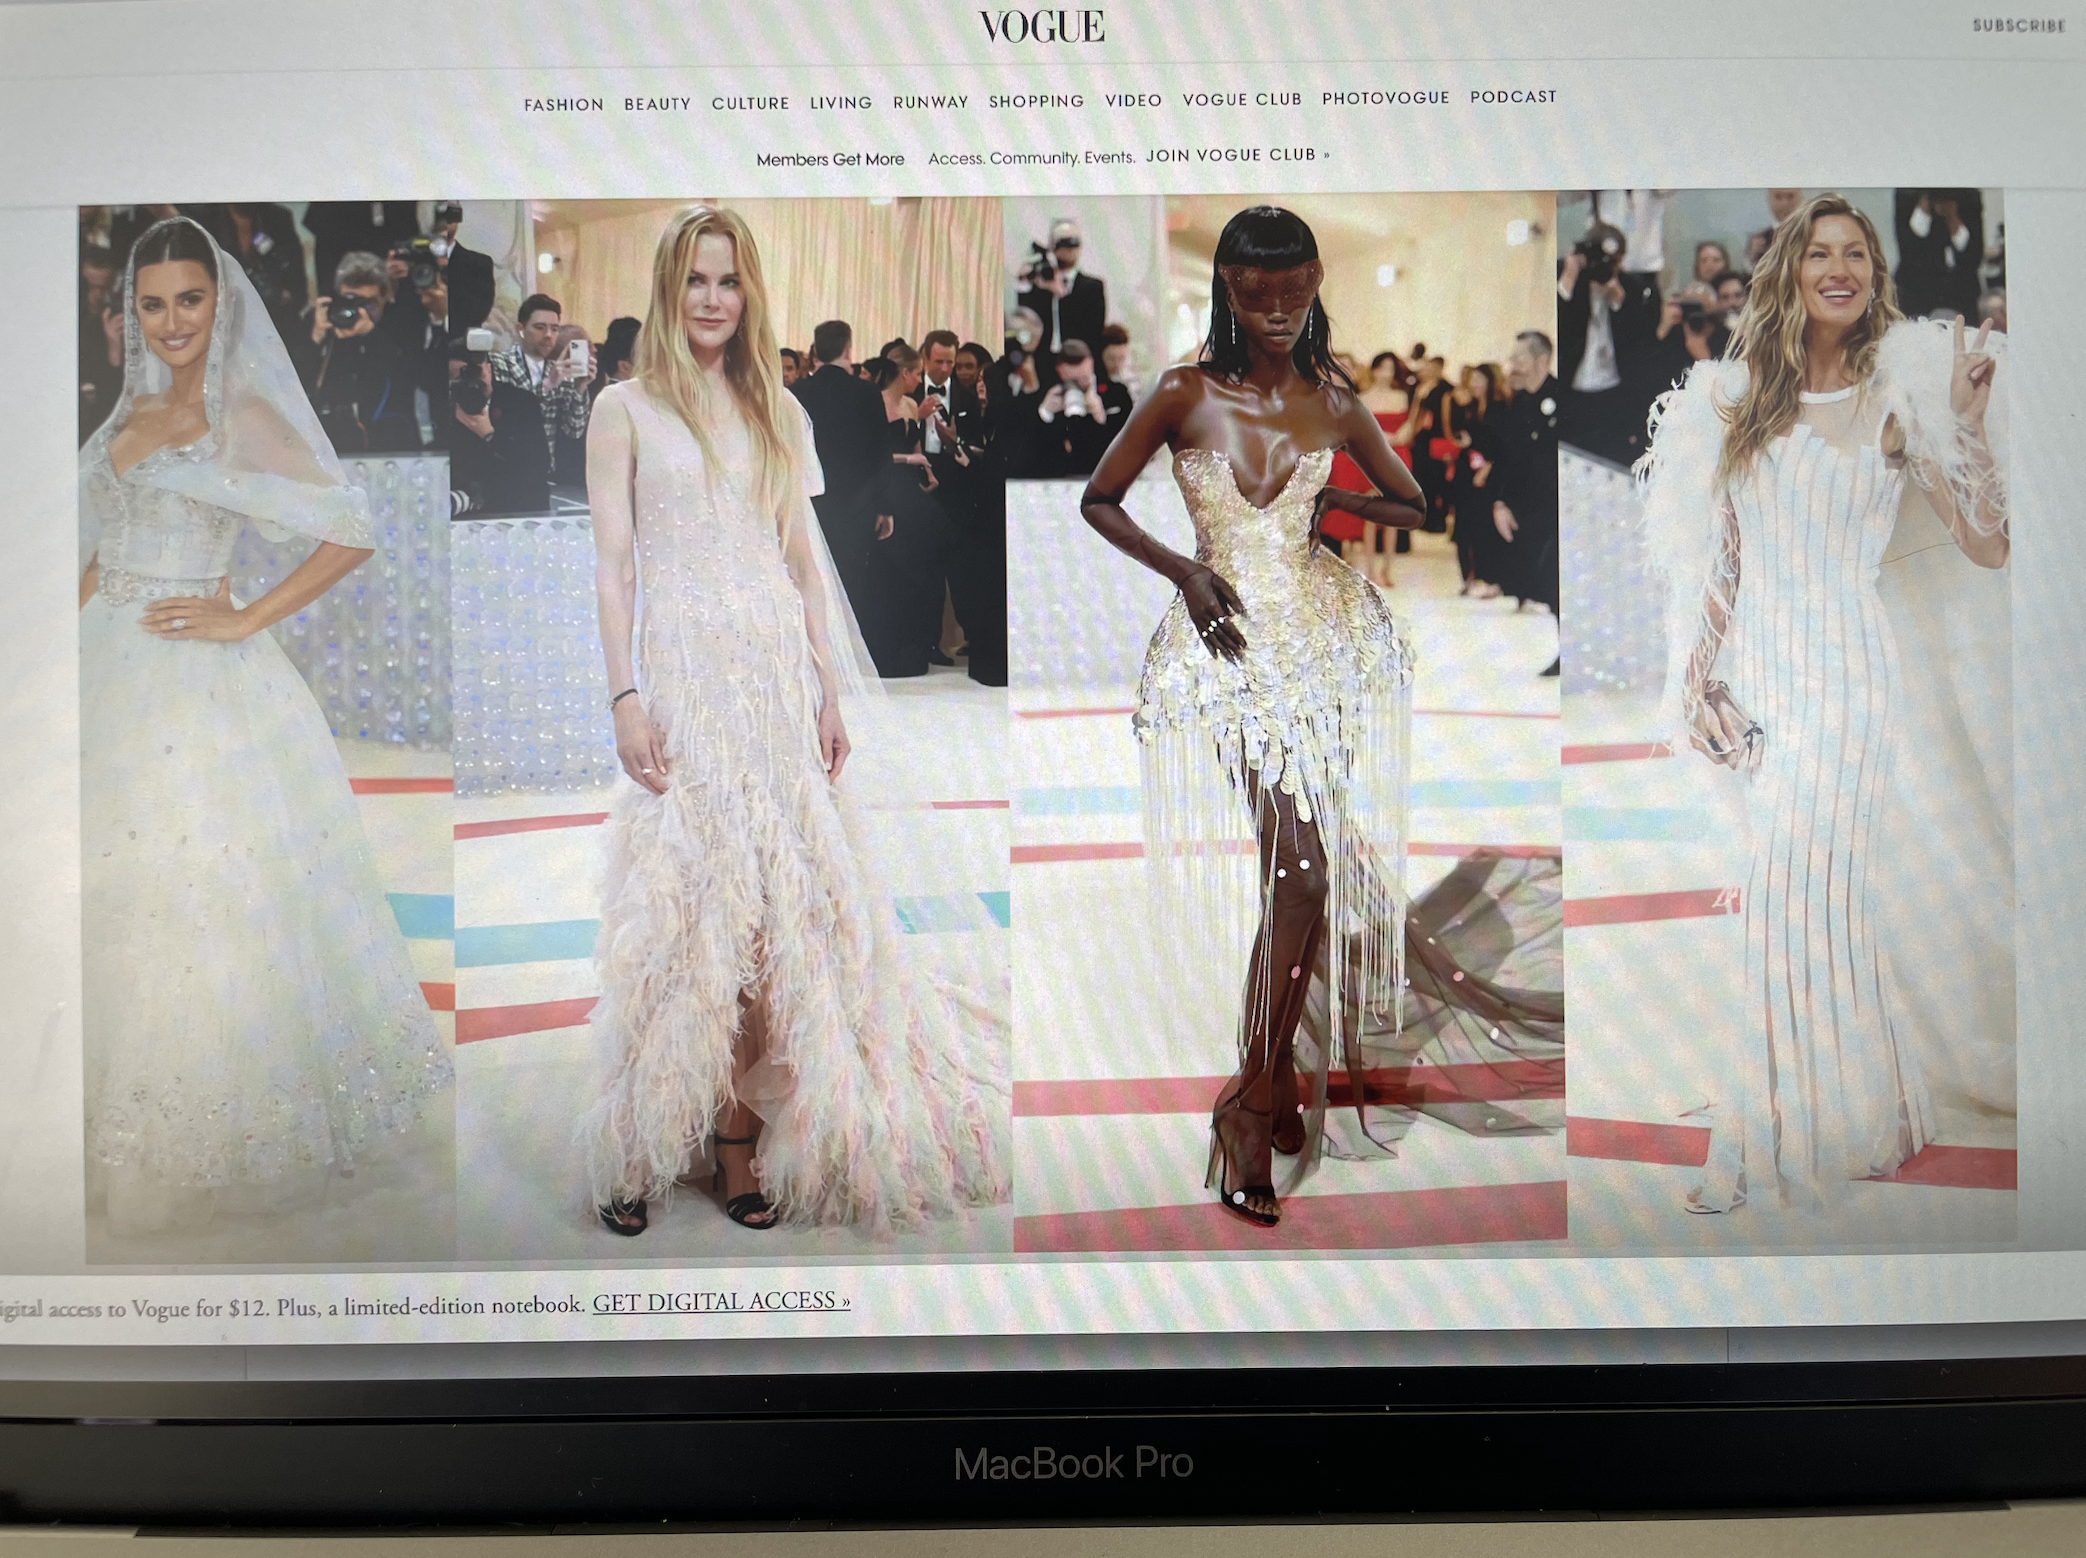 This years Met Gala outfits displayed on the Vogue website